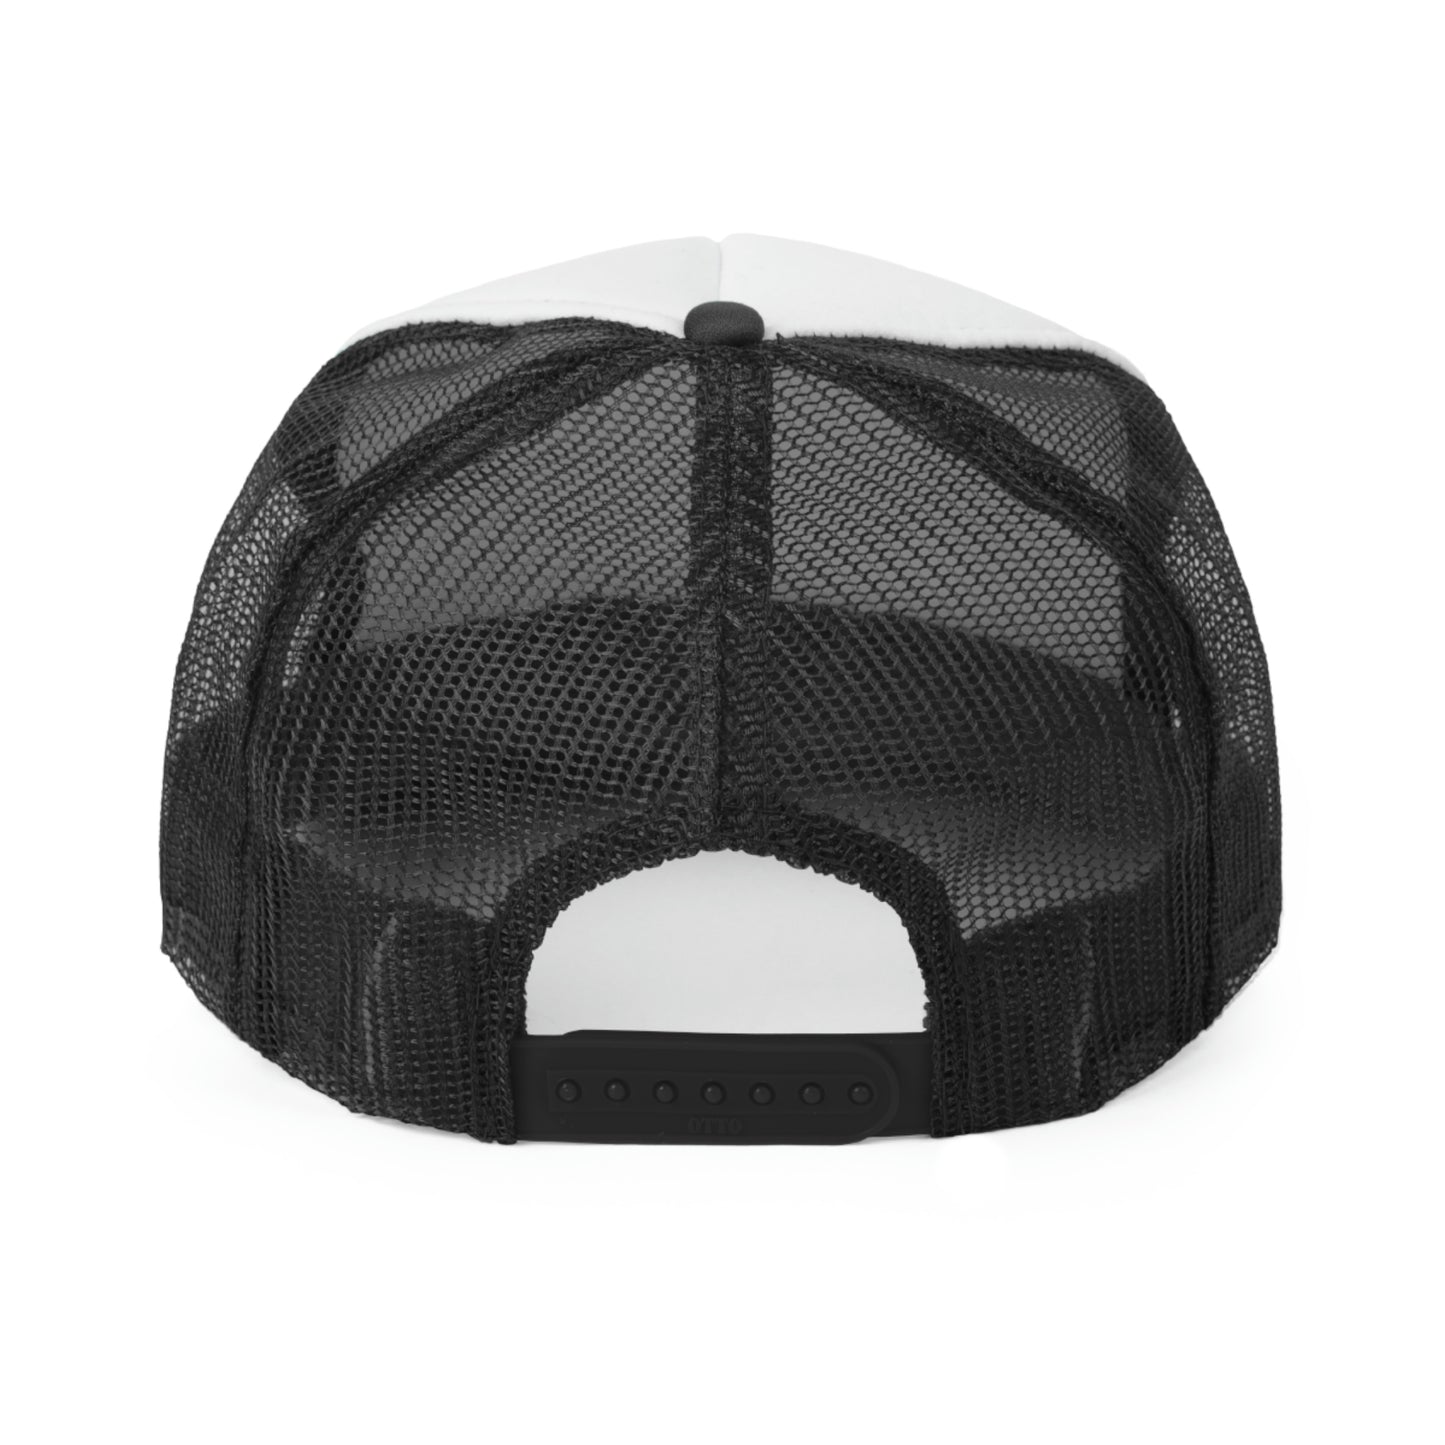 SiStained8 Mesh Hat